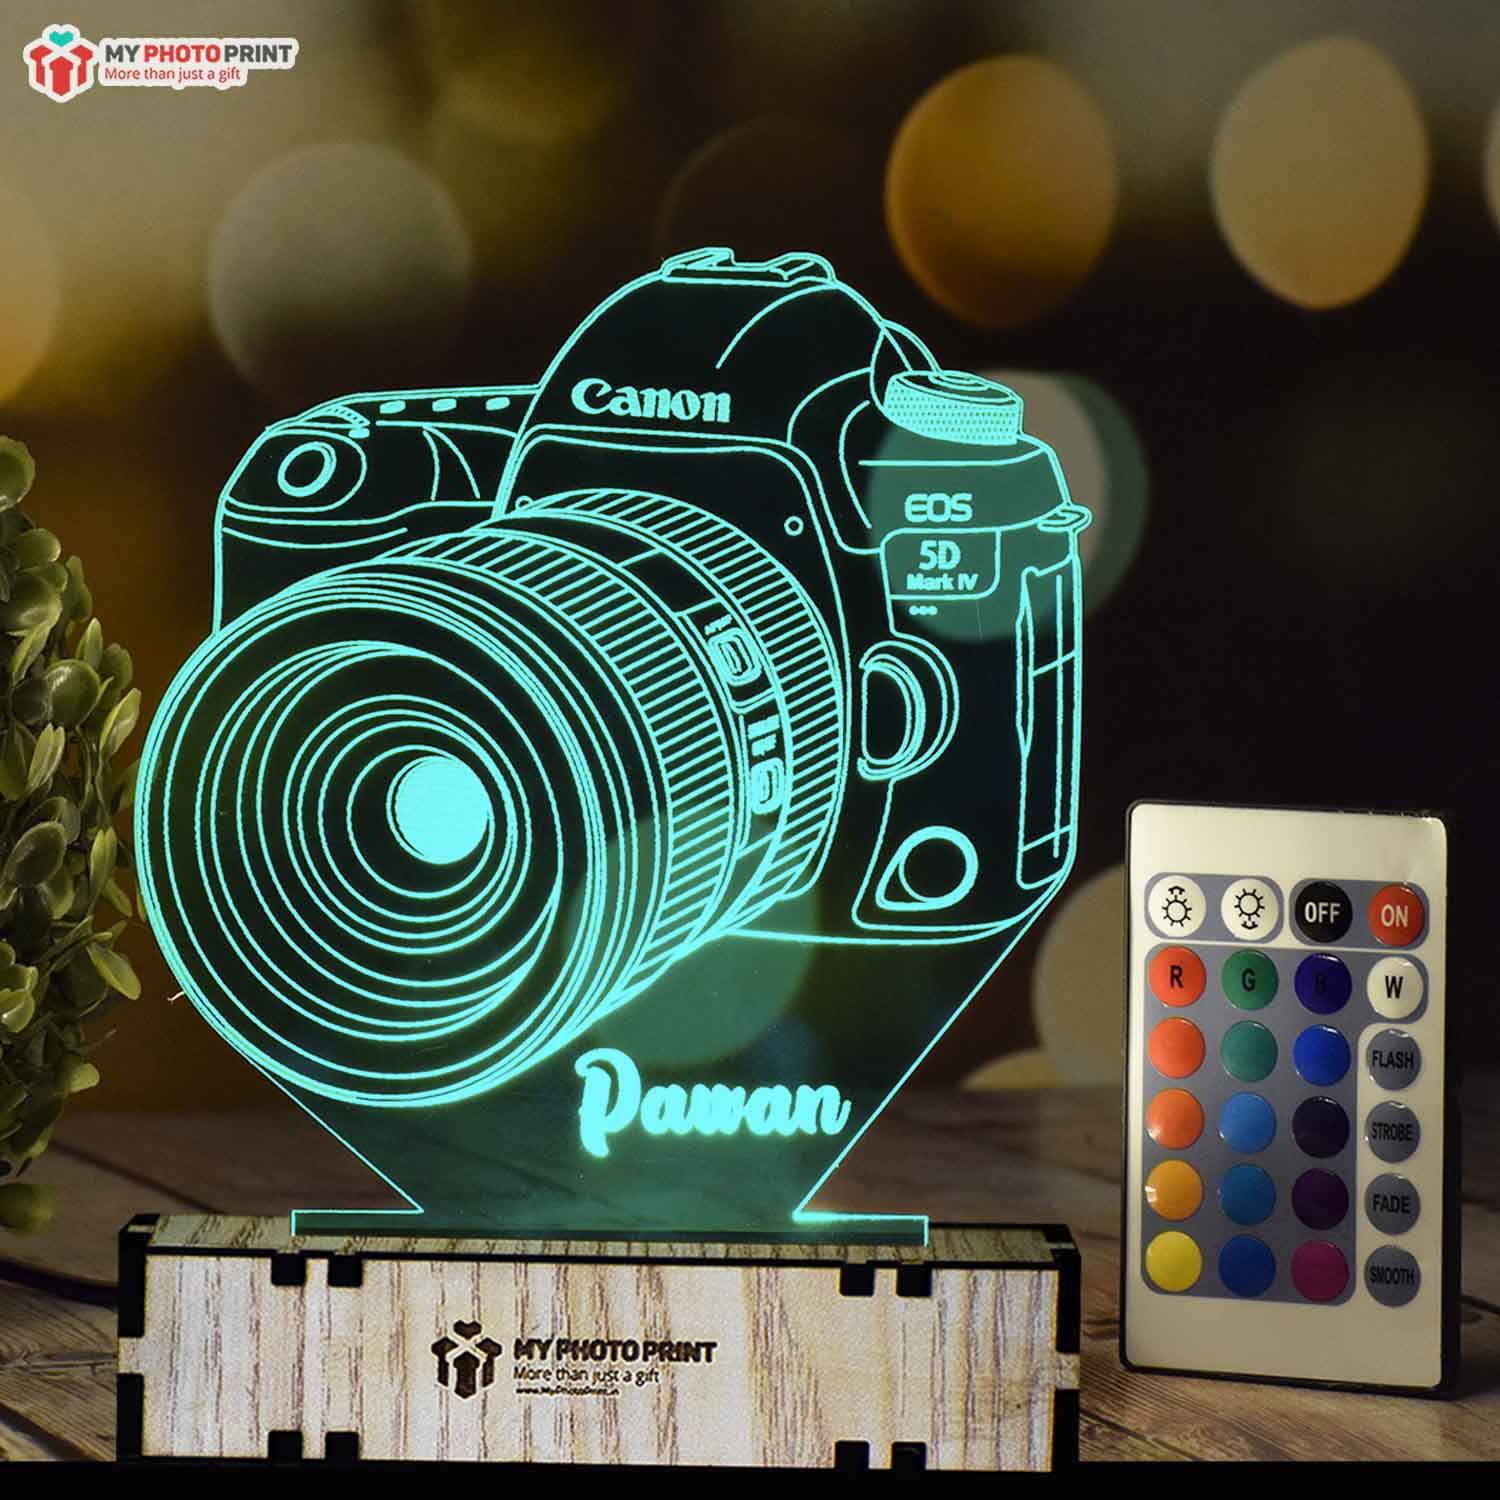 Find a Camera Night Lamp Name on It Online India You can also order for the lamp that has the name engraved on it. However, if you are interested in buying a brand new lamp, then you can check out all the details about the same online. If you want to save money, you can also check out different online shops that sell lamps at discounted rates. This will make it easy for you to compare the prices and make the right choice.